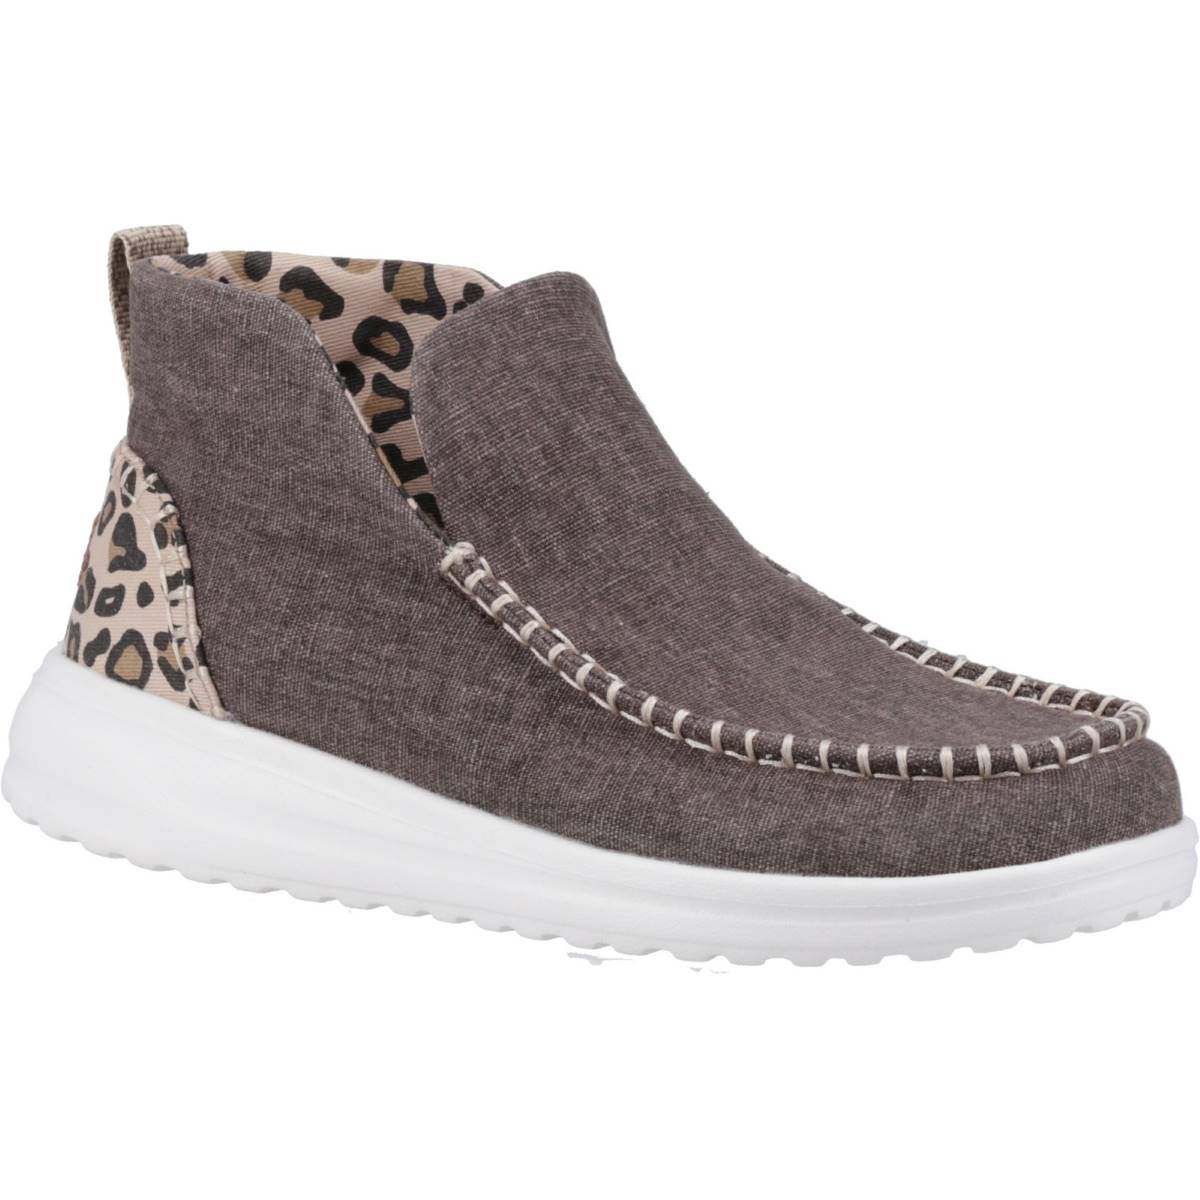 Hey Dude Denny Leopard print Womens ankle boots 40209-90L in a Plain Textile in Size 8